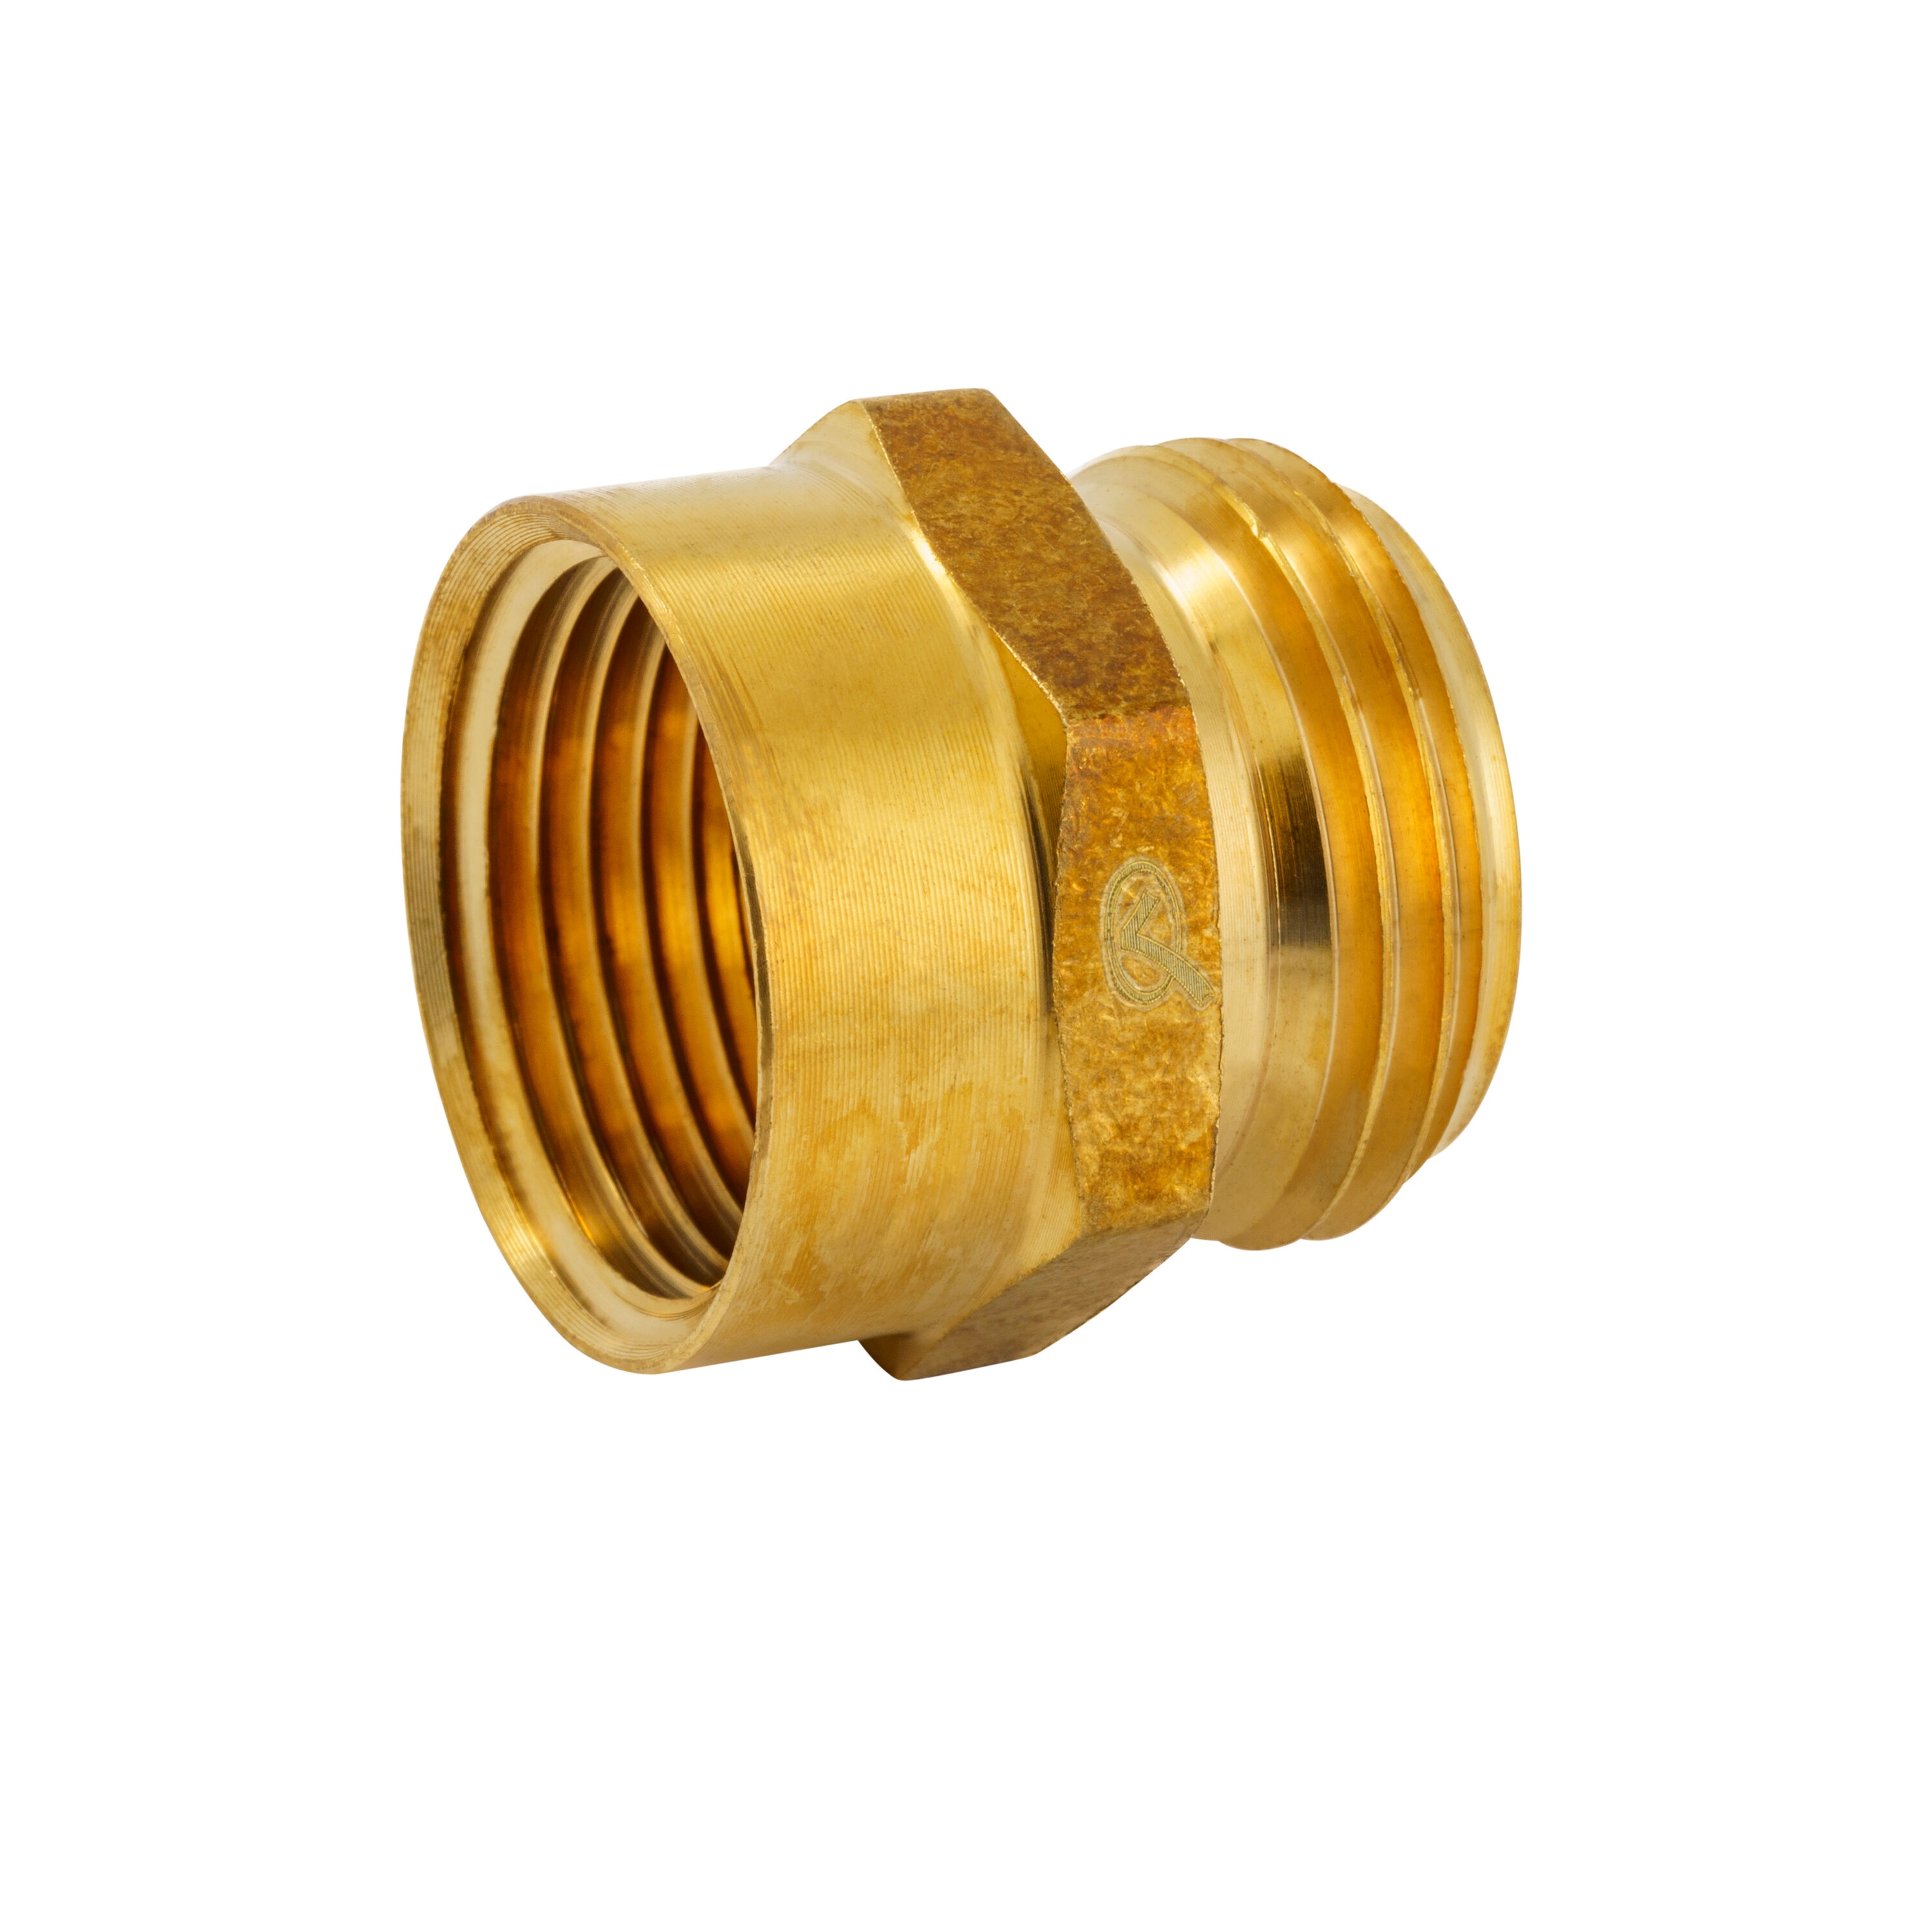 WHK 2 PCS 3/8 Compression Tee Fittings Water Line Splitter Angle Stop  Add-A-Tee Valve Lead-Free Brass 3 Way Valve 3/8-Inch Compression Inlet X